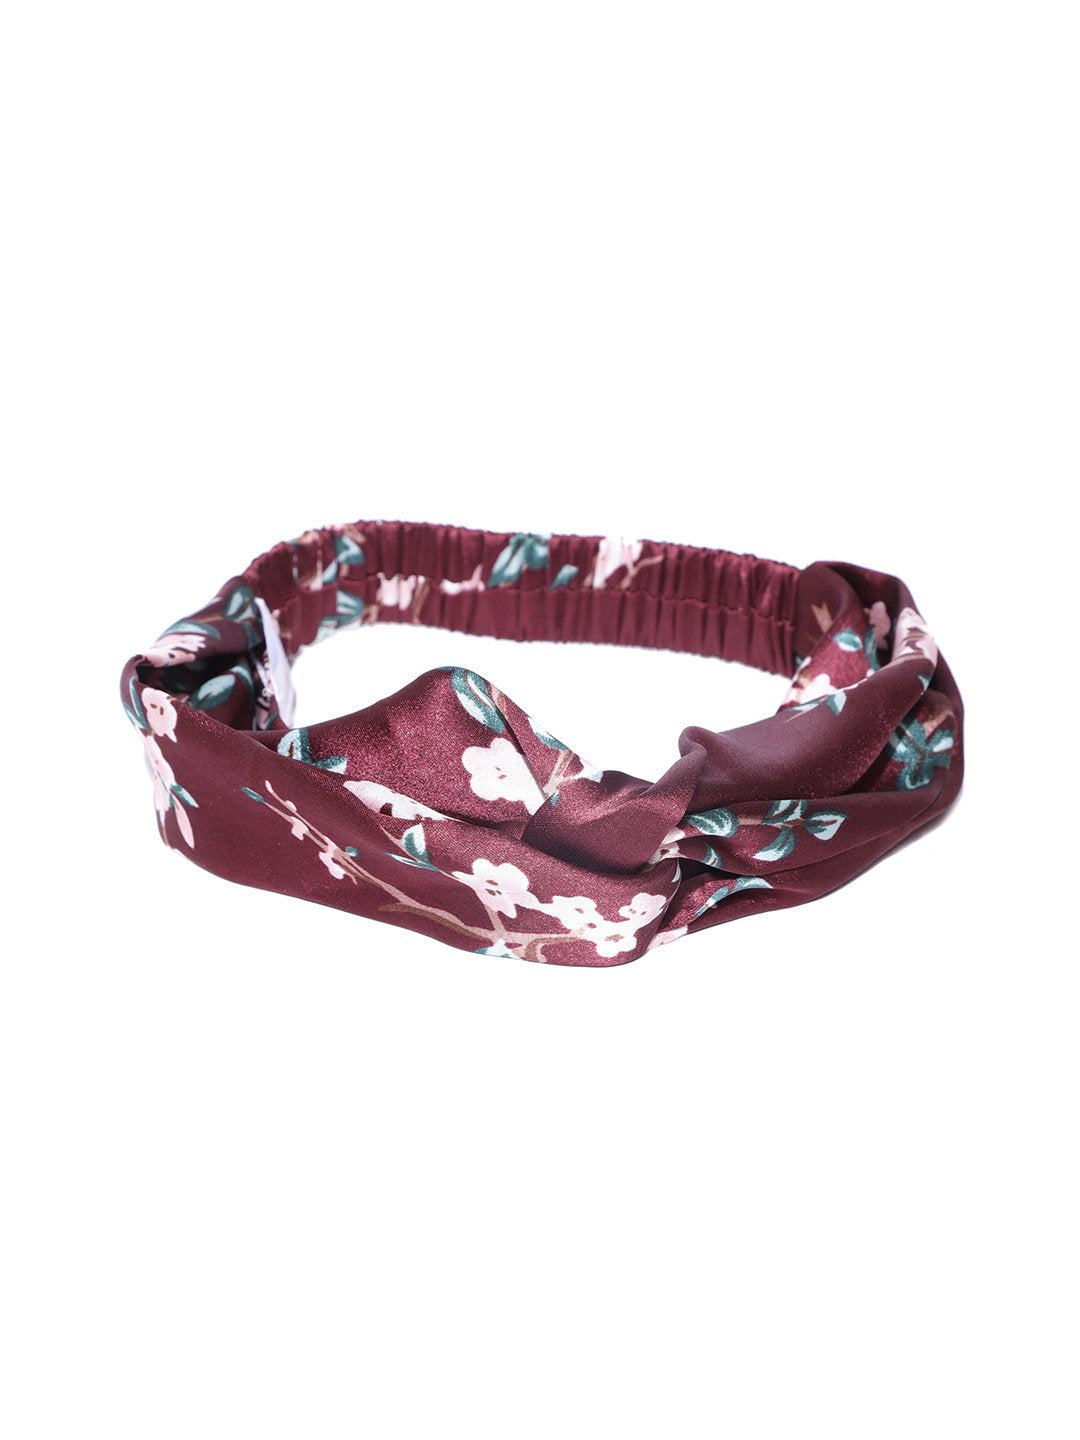 Blueberry brown satin headwrap with multi coloured printed